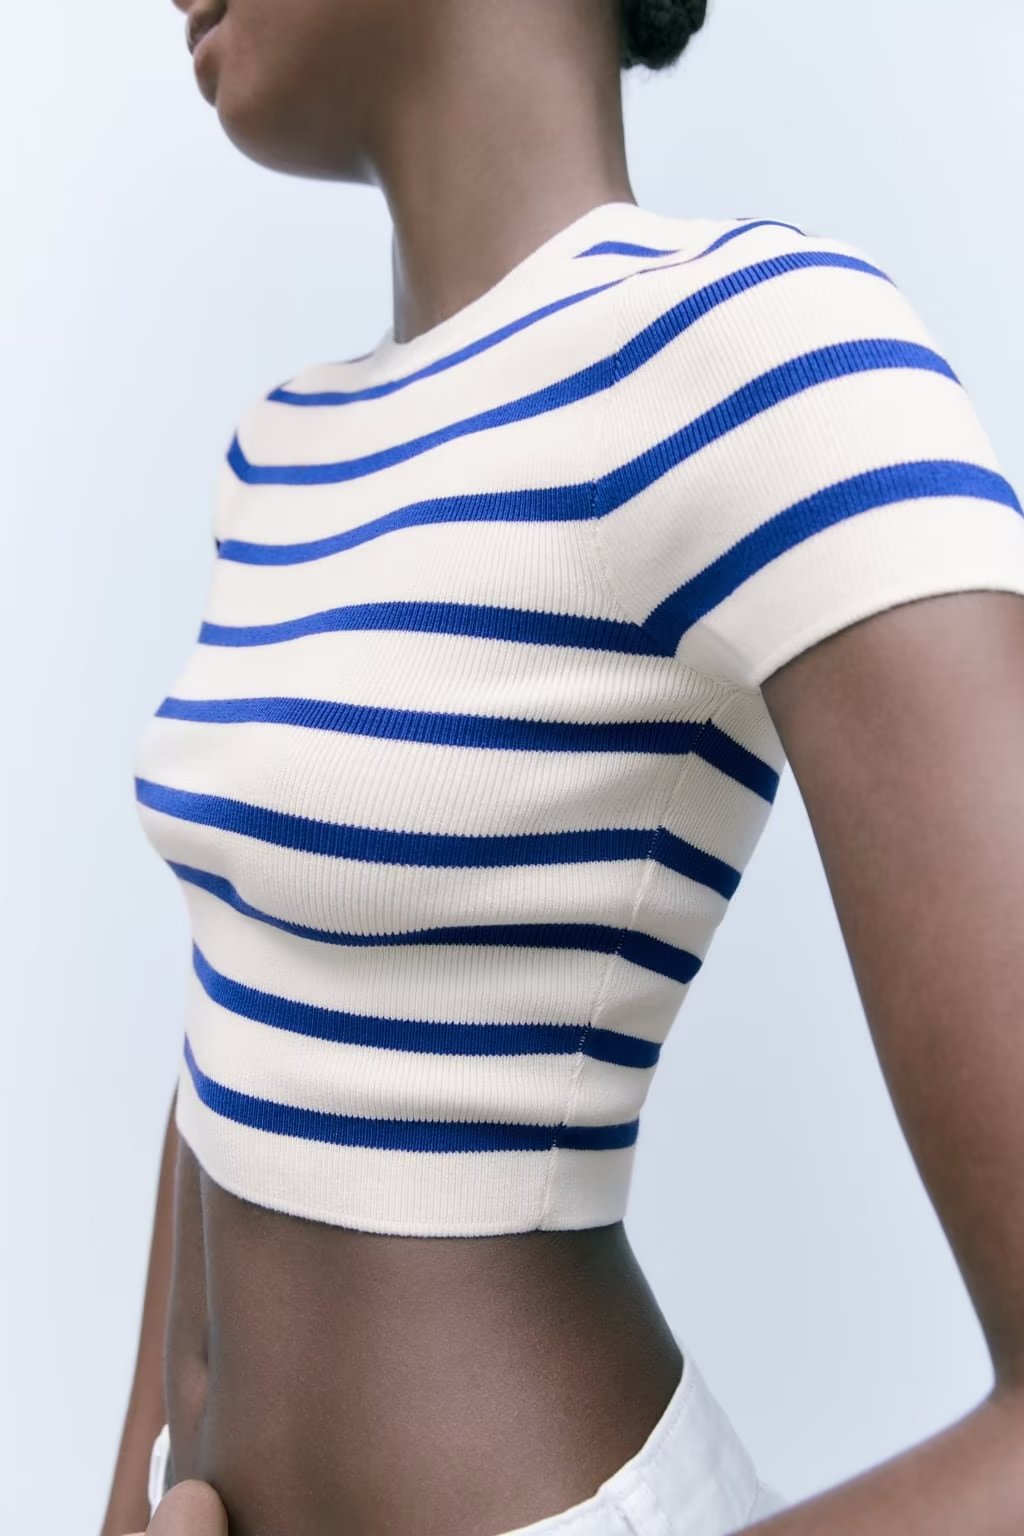 Fashion Trends 2023 | Old Money Aesthetic Knitted Striped Crop Top